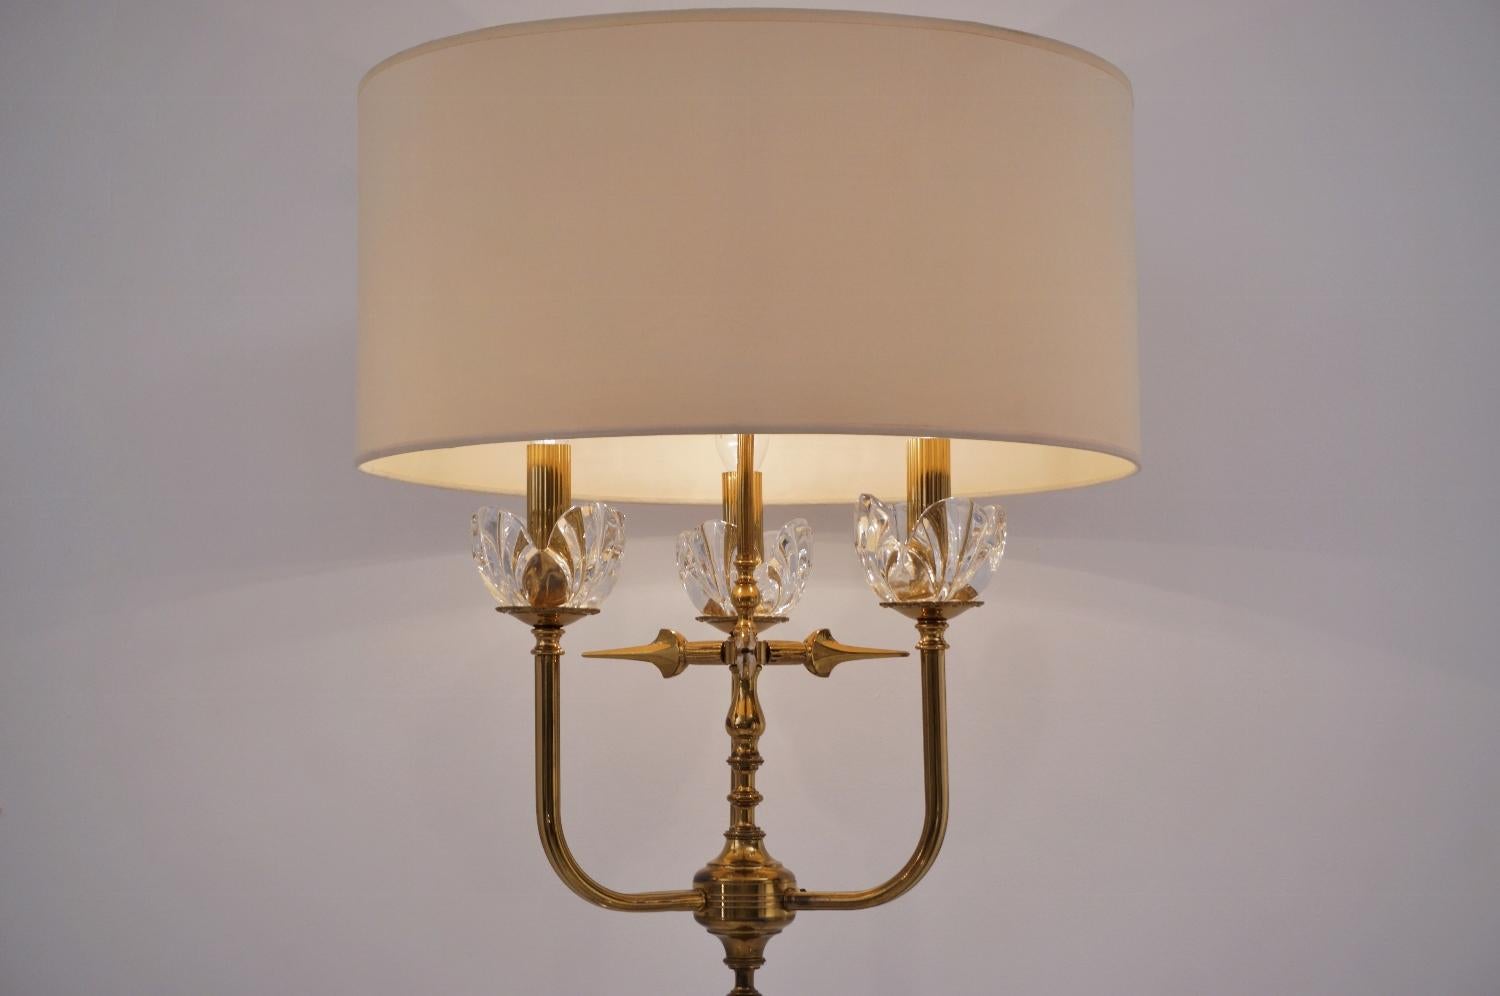 Maison Charles style floor lamp, brass frame with `Lalique-style` crystal iris flowers, circa 1950s, French

This floor lamp has been gently cleaned while respecting the vintage patina. Newly rewired and earthed with gold tone silk cable and new